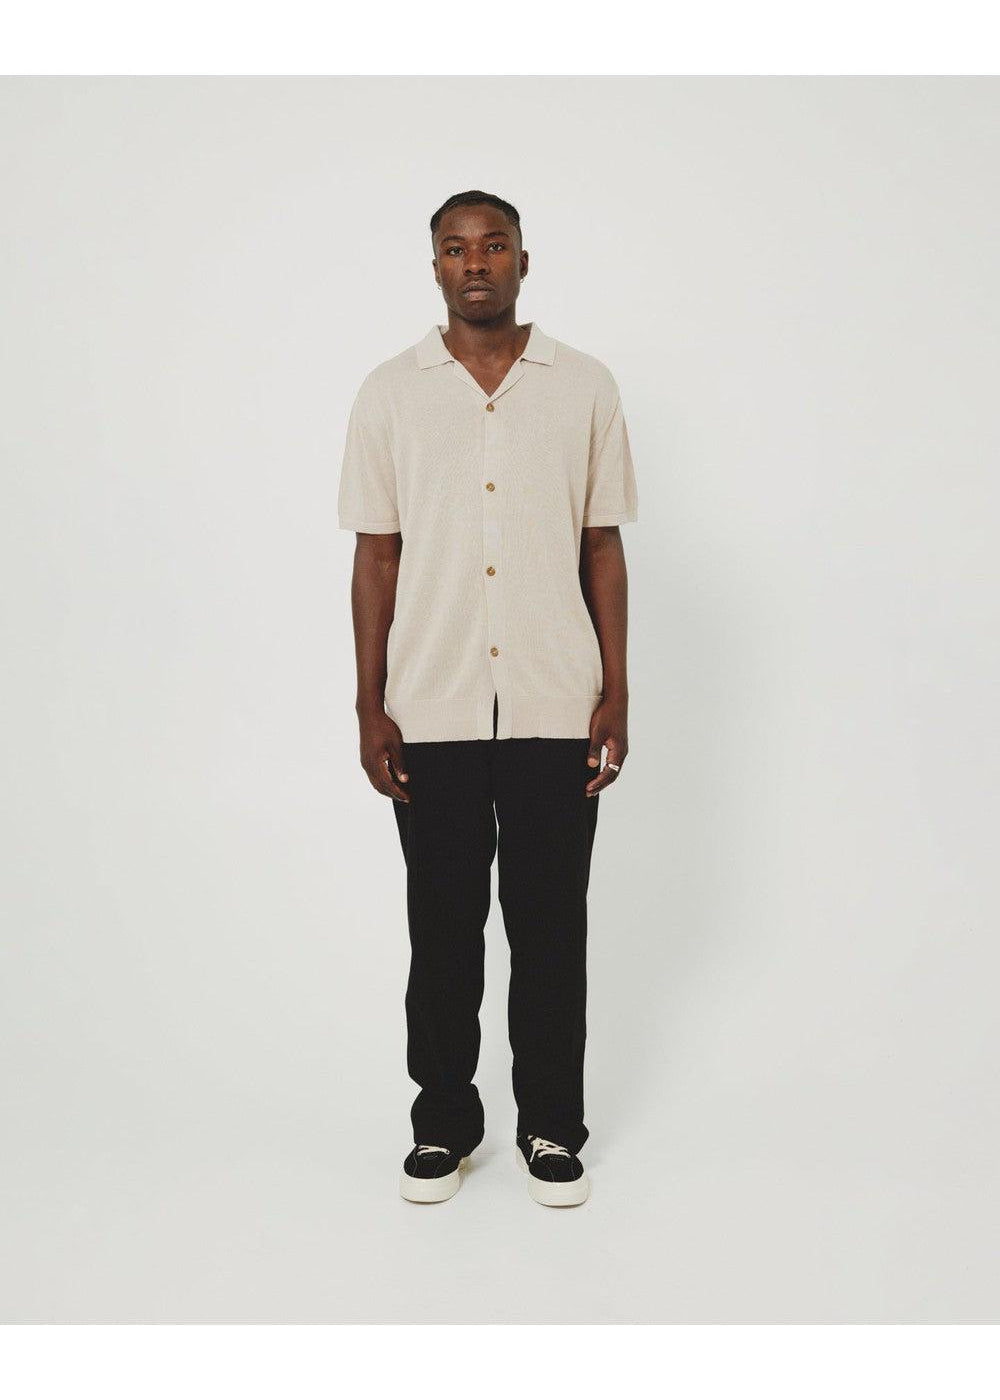 CAMPER KNIT SS SHIRT - BEIGE | Kore Studios | Mad About The Boy